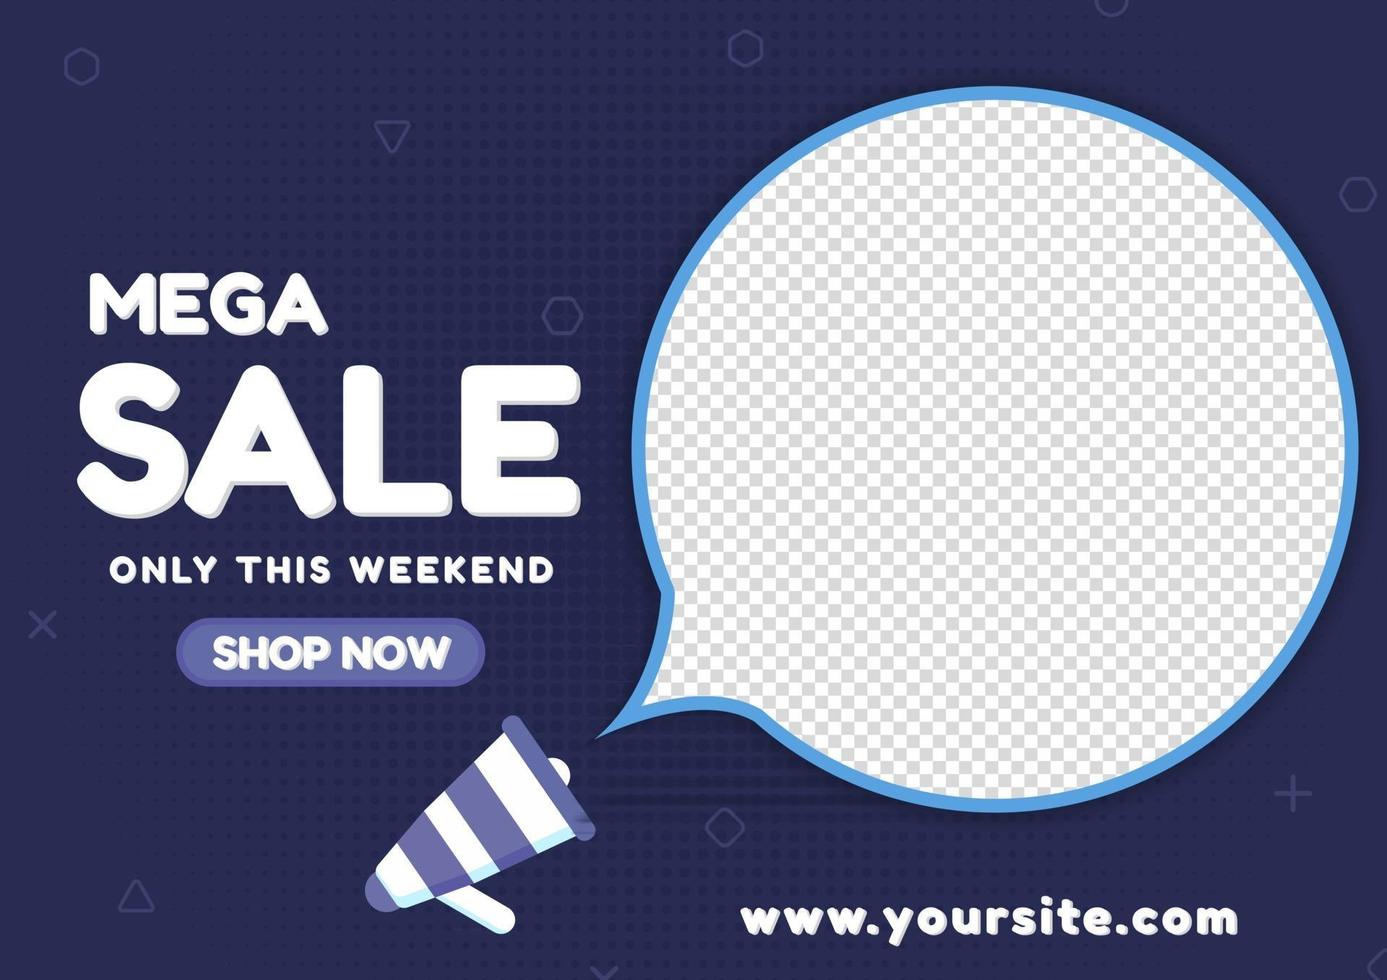 Sale banner special offer shopping online advertise best deal vector